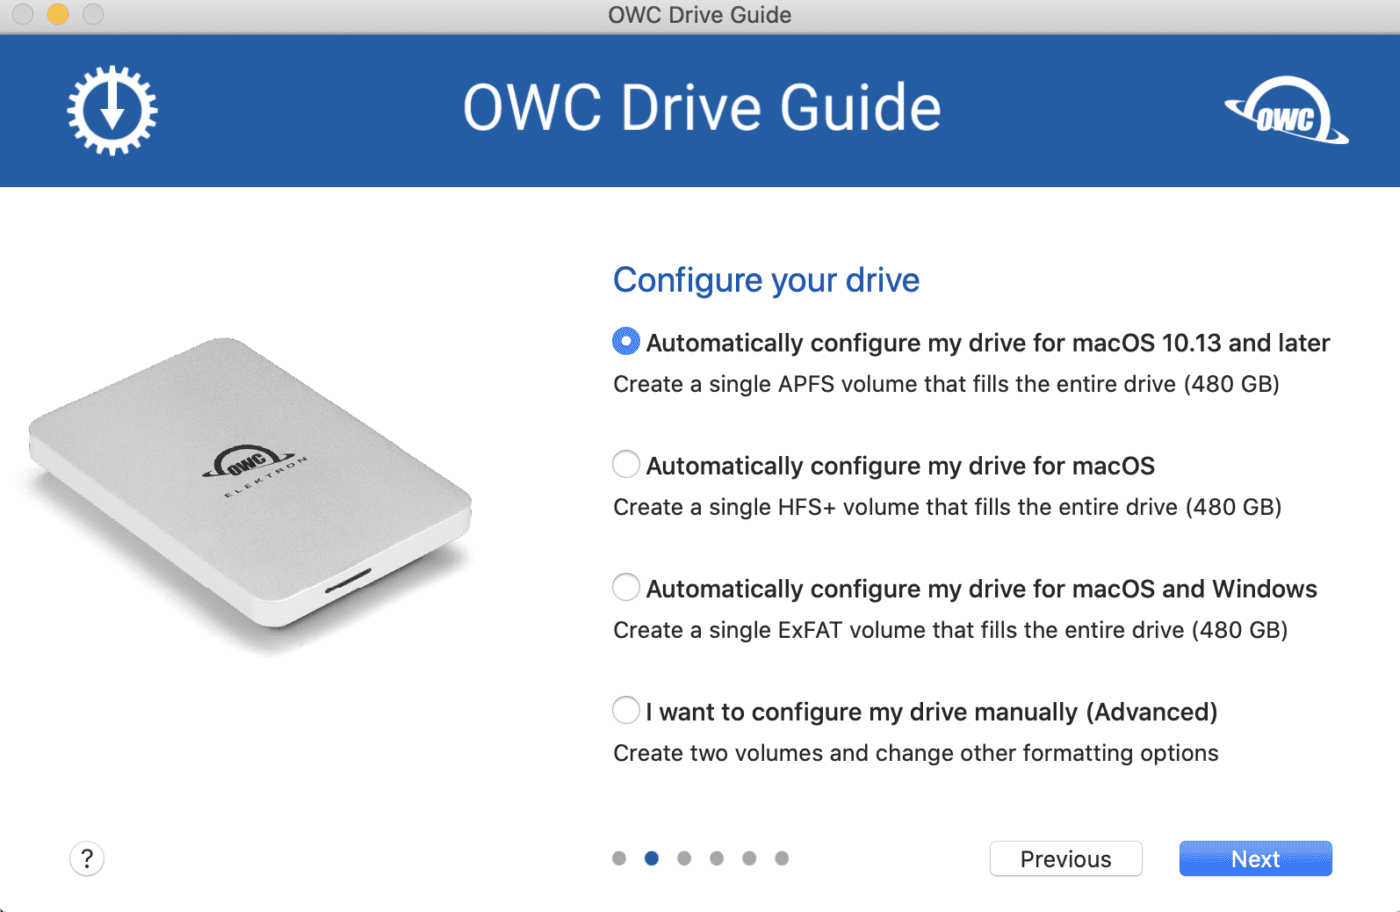 The OWC Drive Guide app is preinstalled on the Envoy Pro Elektron and makes setup of the drive a snap.